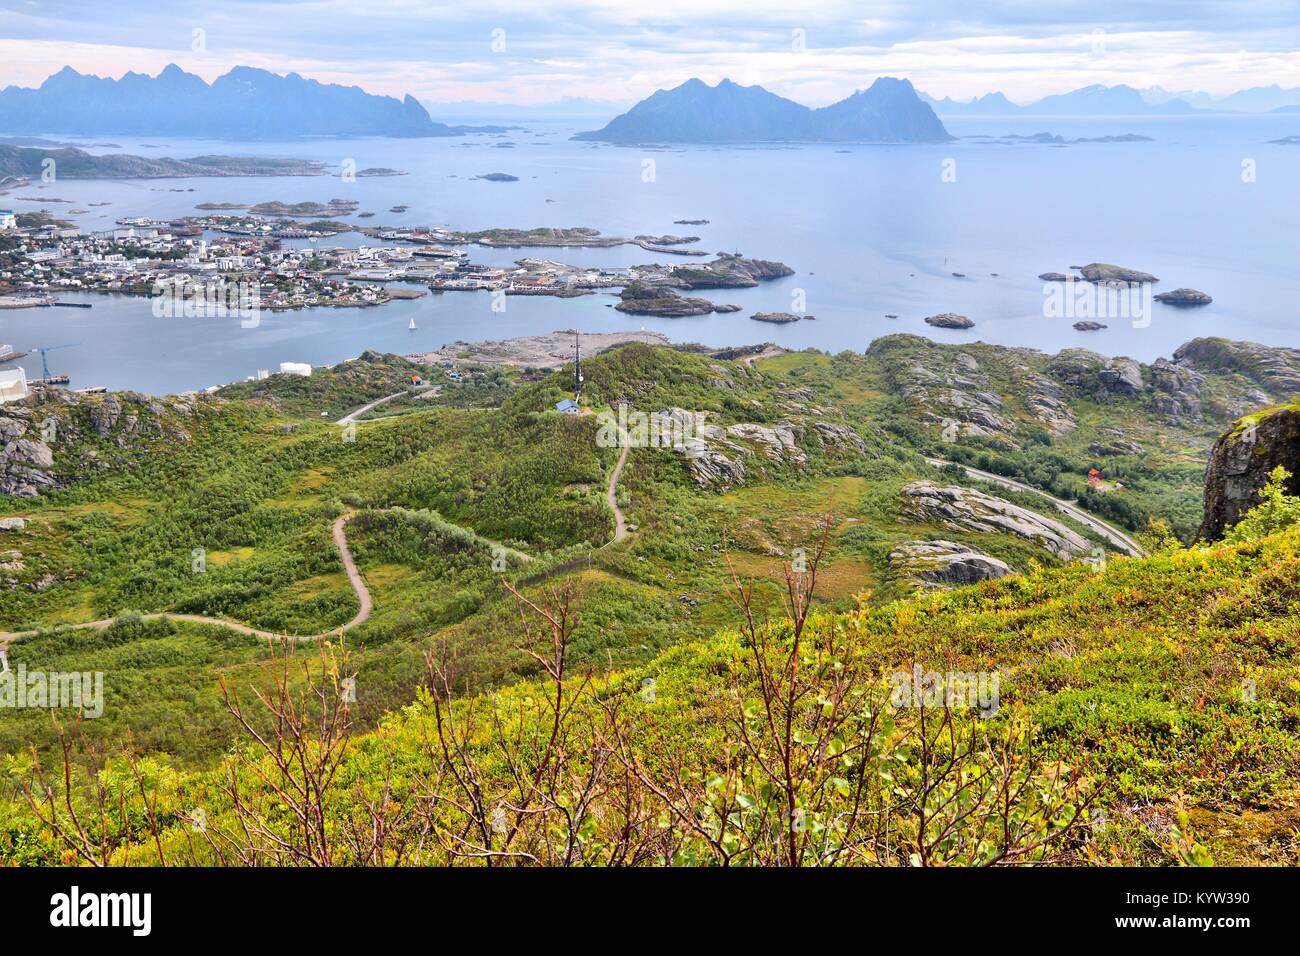 Lofoten archipelago in Arctic Norway. Svolvaer town view on Austvagoya island. Aerial view of Boreal zone from Tjeldbergtinden hiking trail. Stock Photo